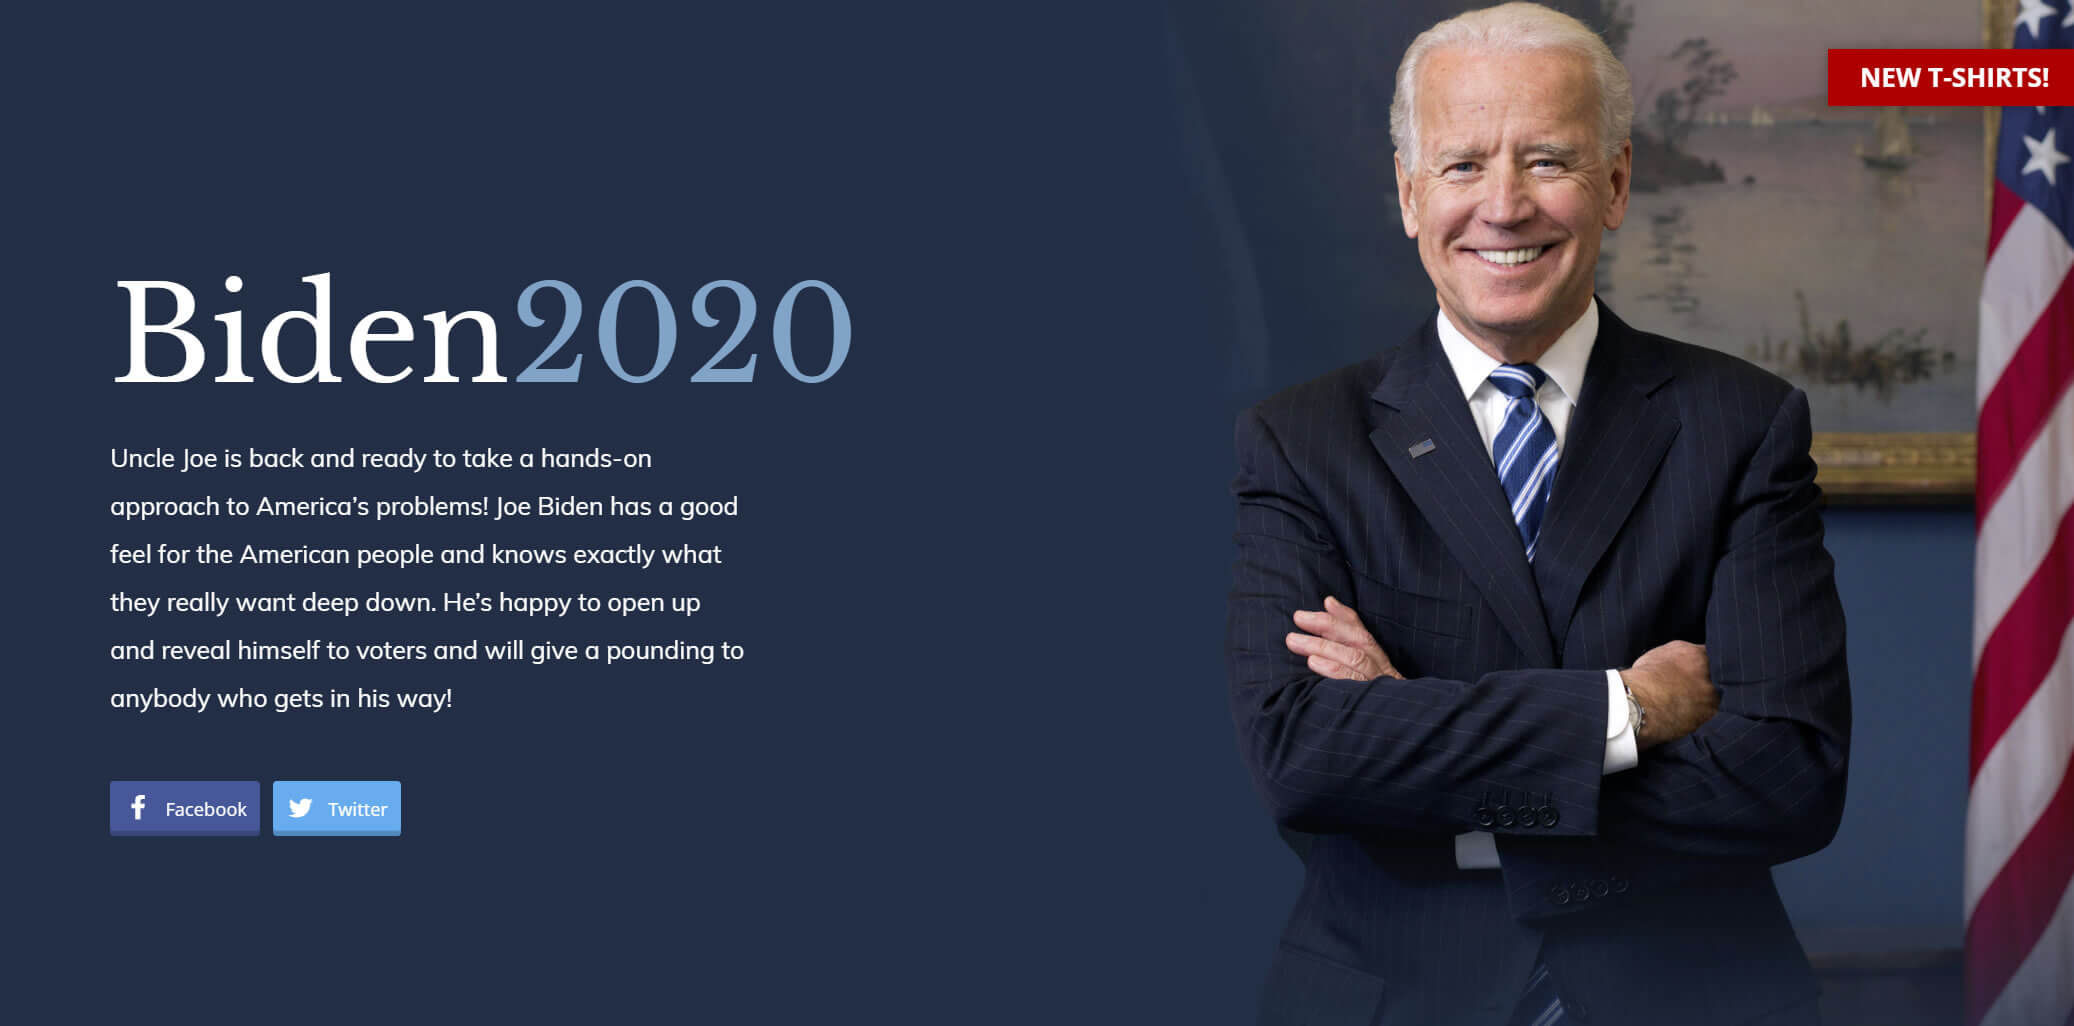 A fake Biden campaign site may be outperforming the real one